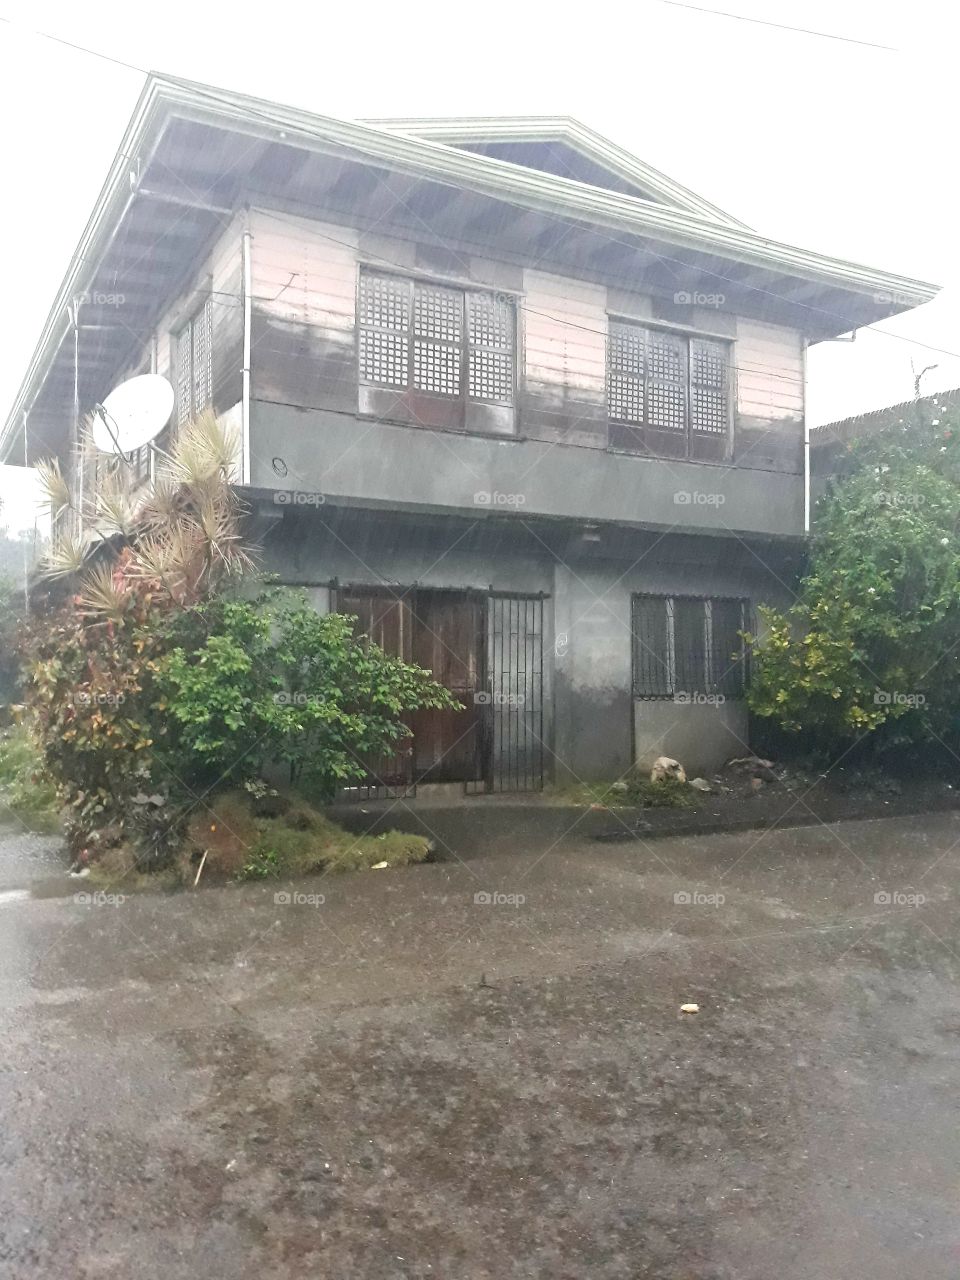 Ancestral home. One rainy day in my hometown in Bayabas, Surigao del Sur Philippines